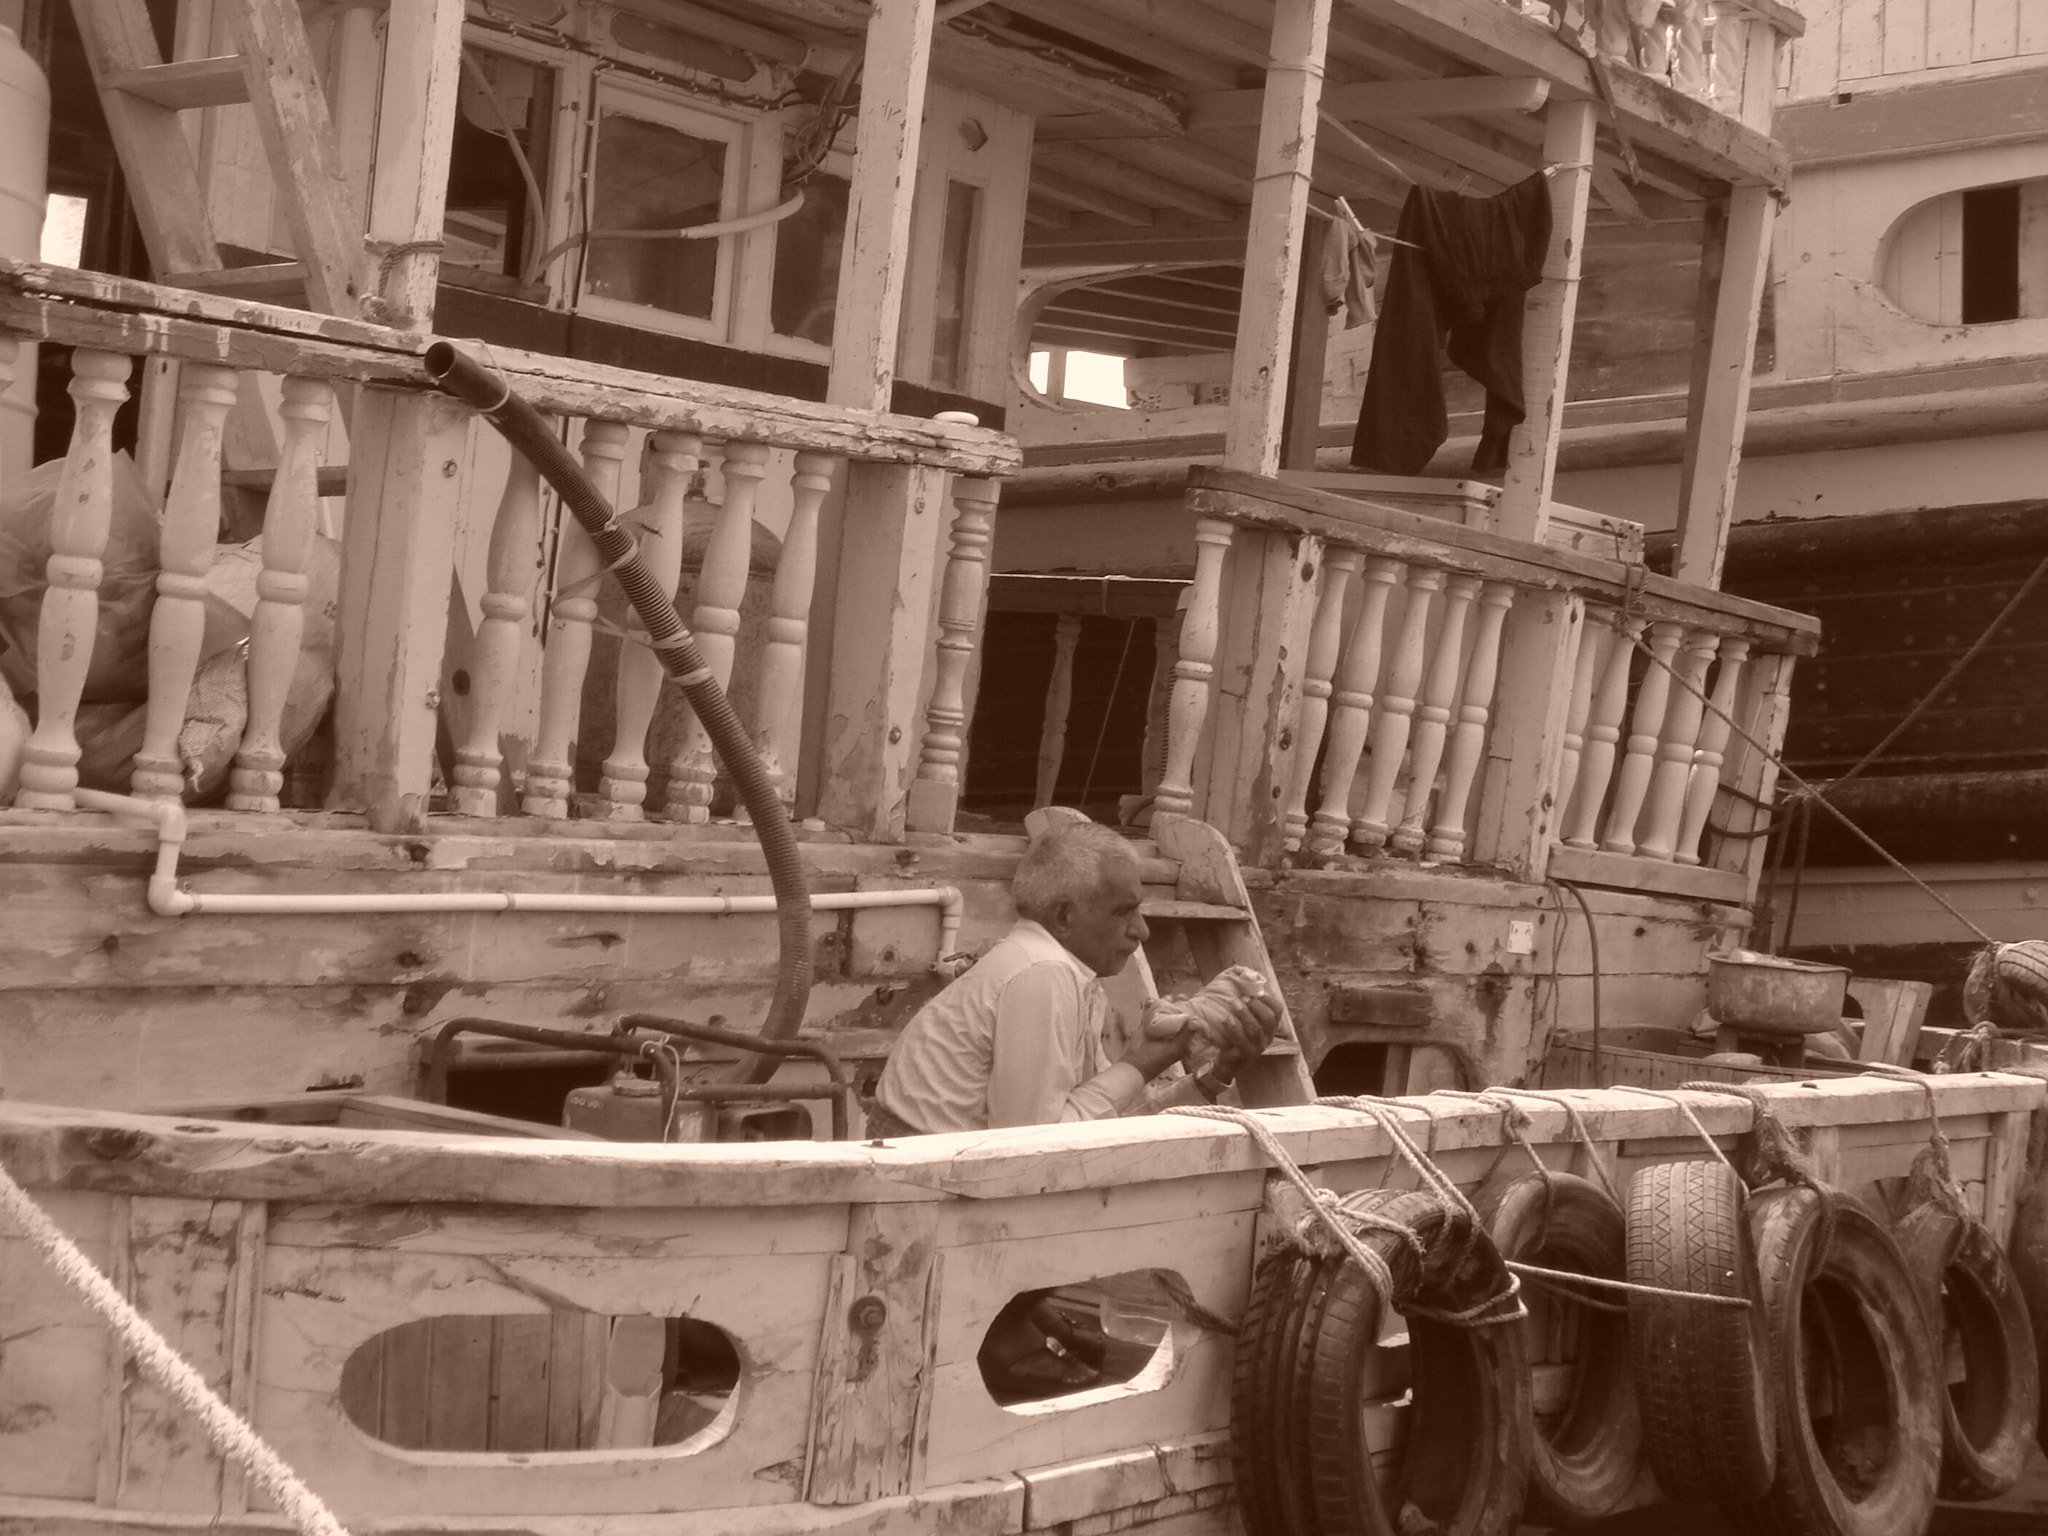 Sony DSC-T9 sample photo. __old man on his old wooden boat - dubai port__ photography